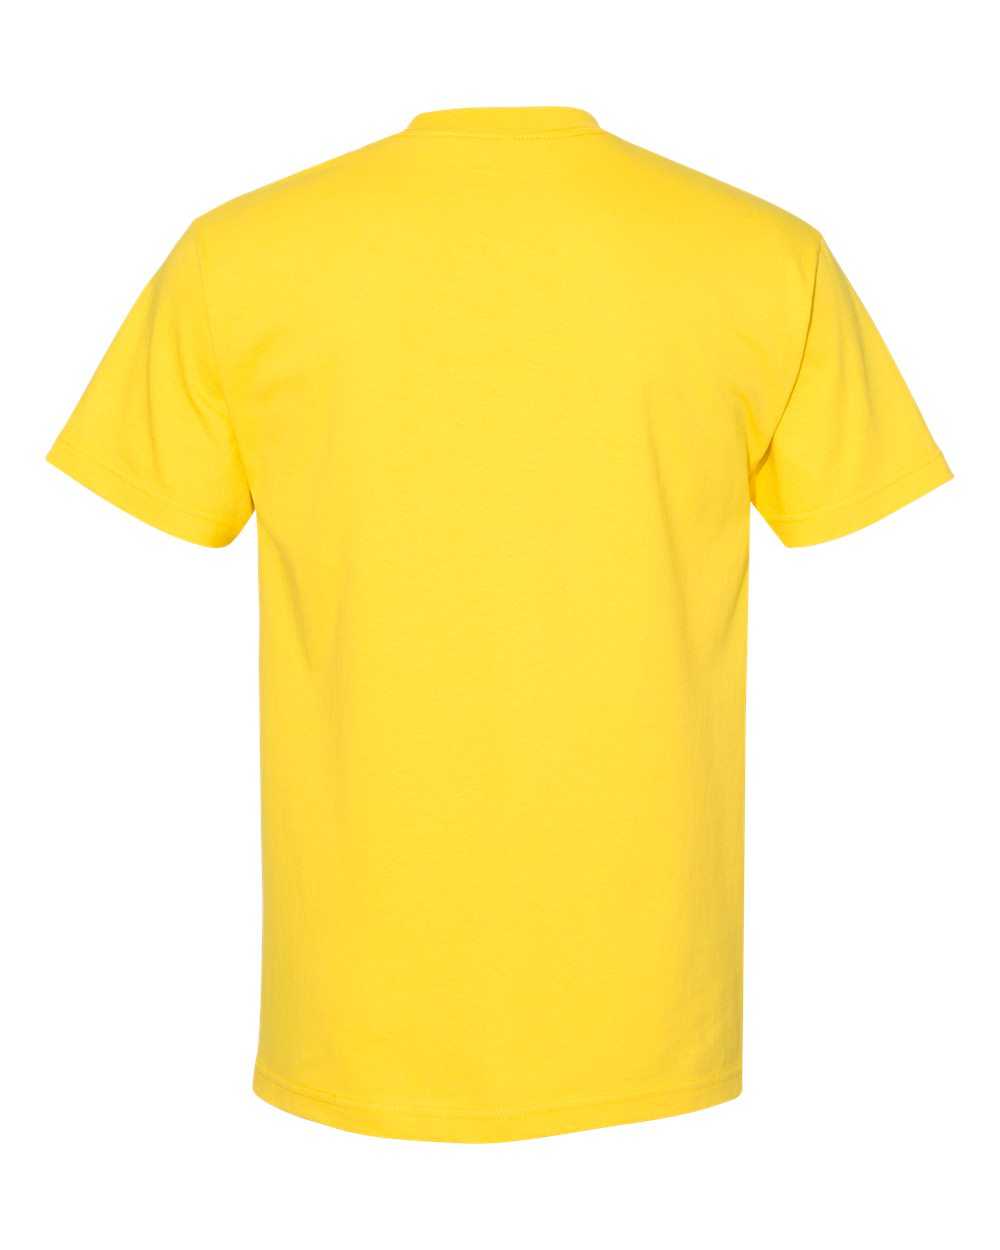 American Apparel 1301 Unisex Heavyweight Cotton T-Shirt - Yellow - HIT a Double